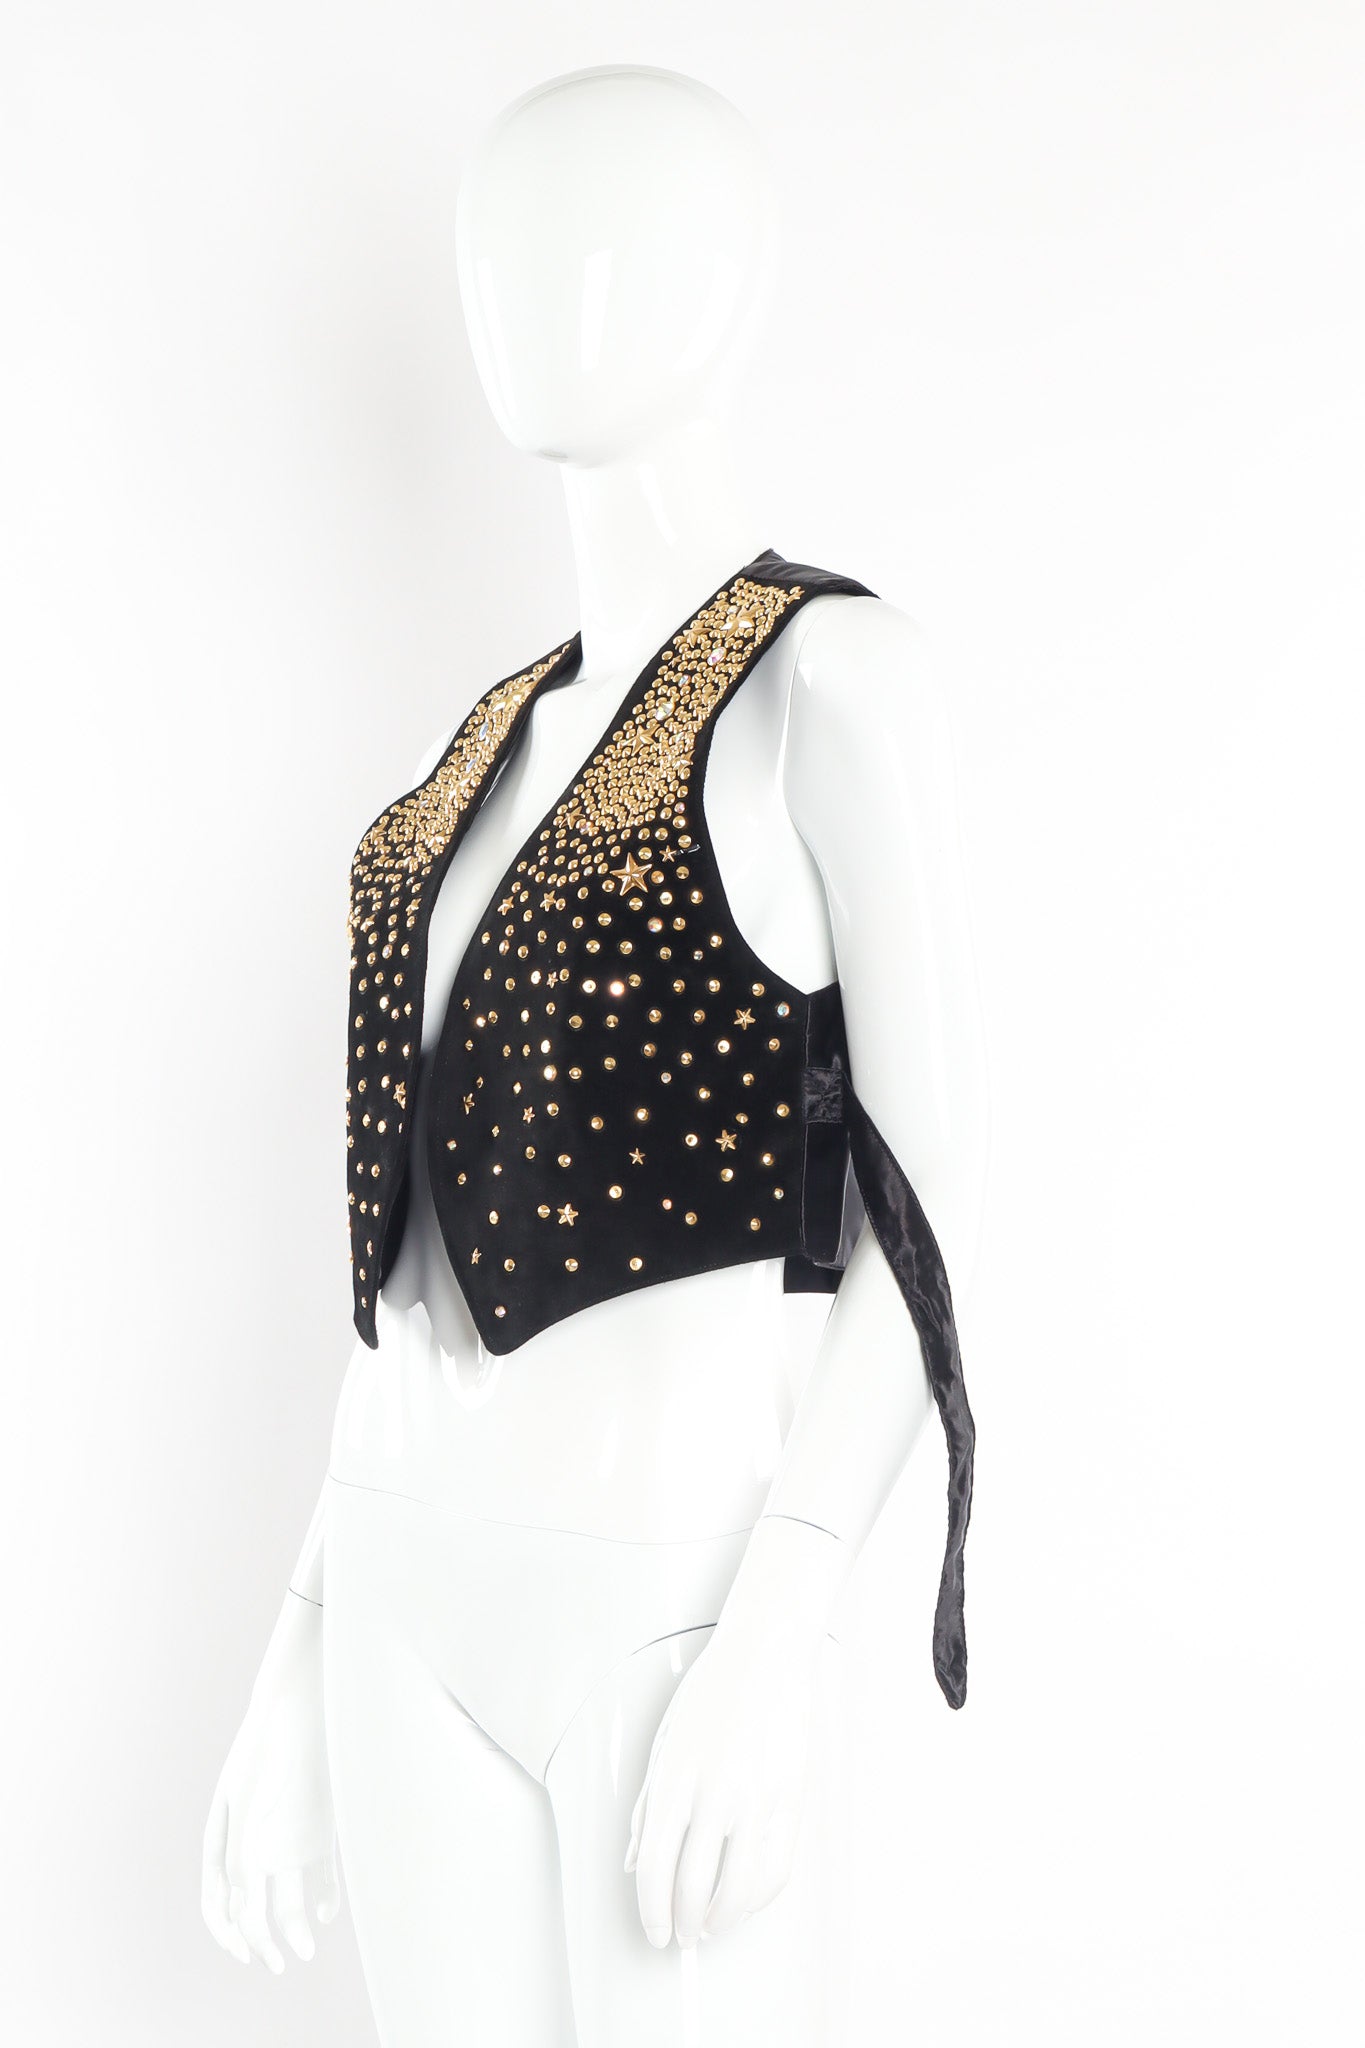 Leather vest with eclectic star and opalescent studs by K. Baumann three quarter view untied @recessla